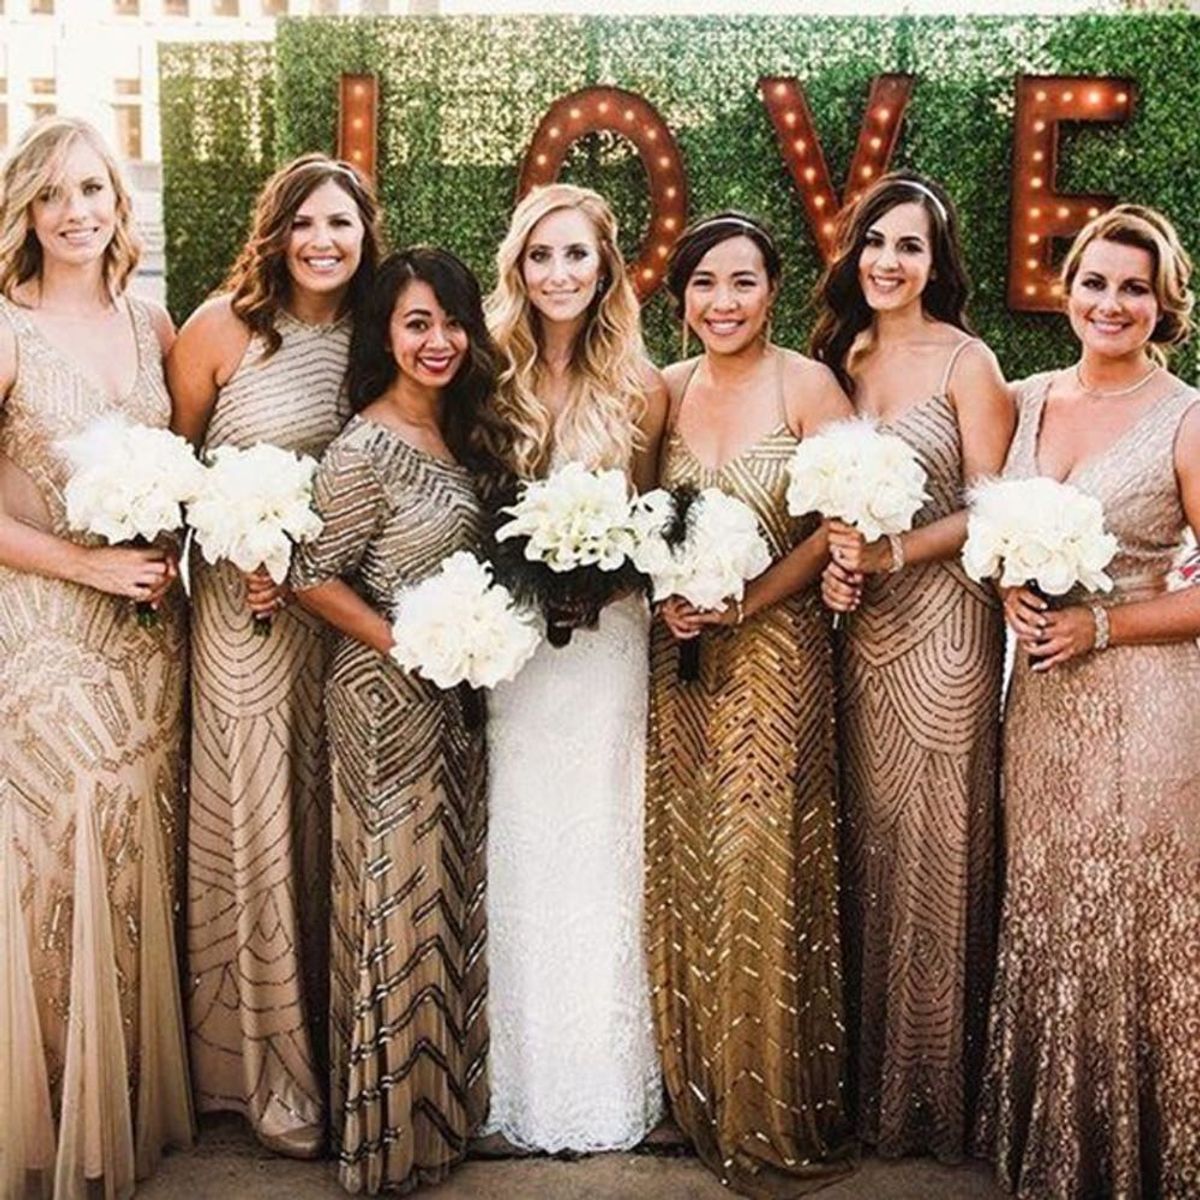 20 Black and Gold Details for a Glam New Year’s Eve Wedding